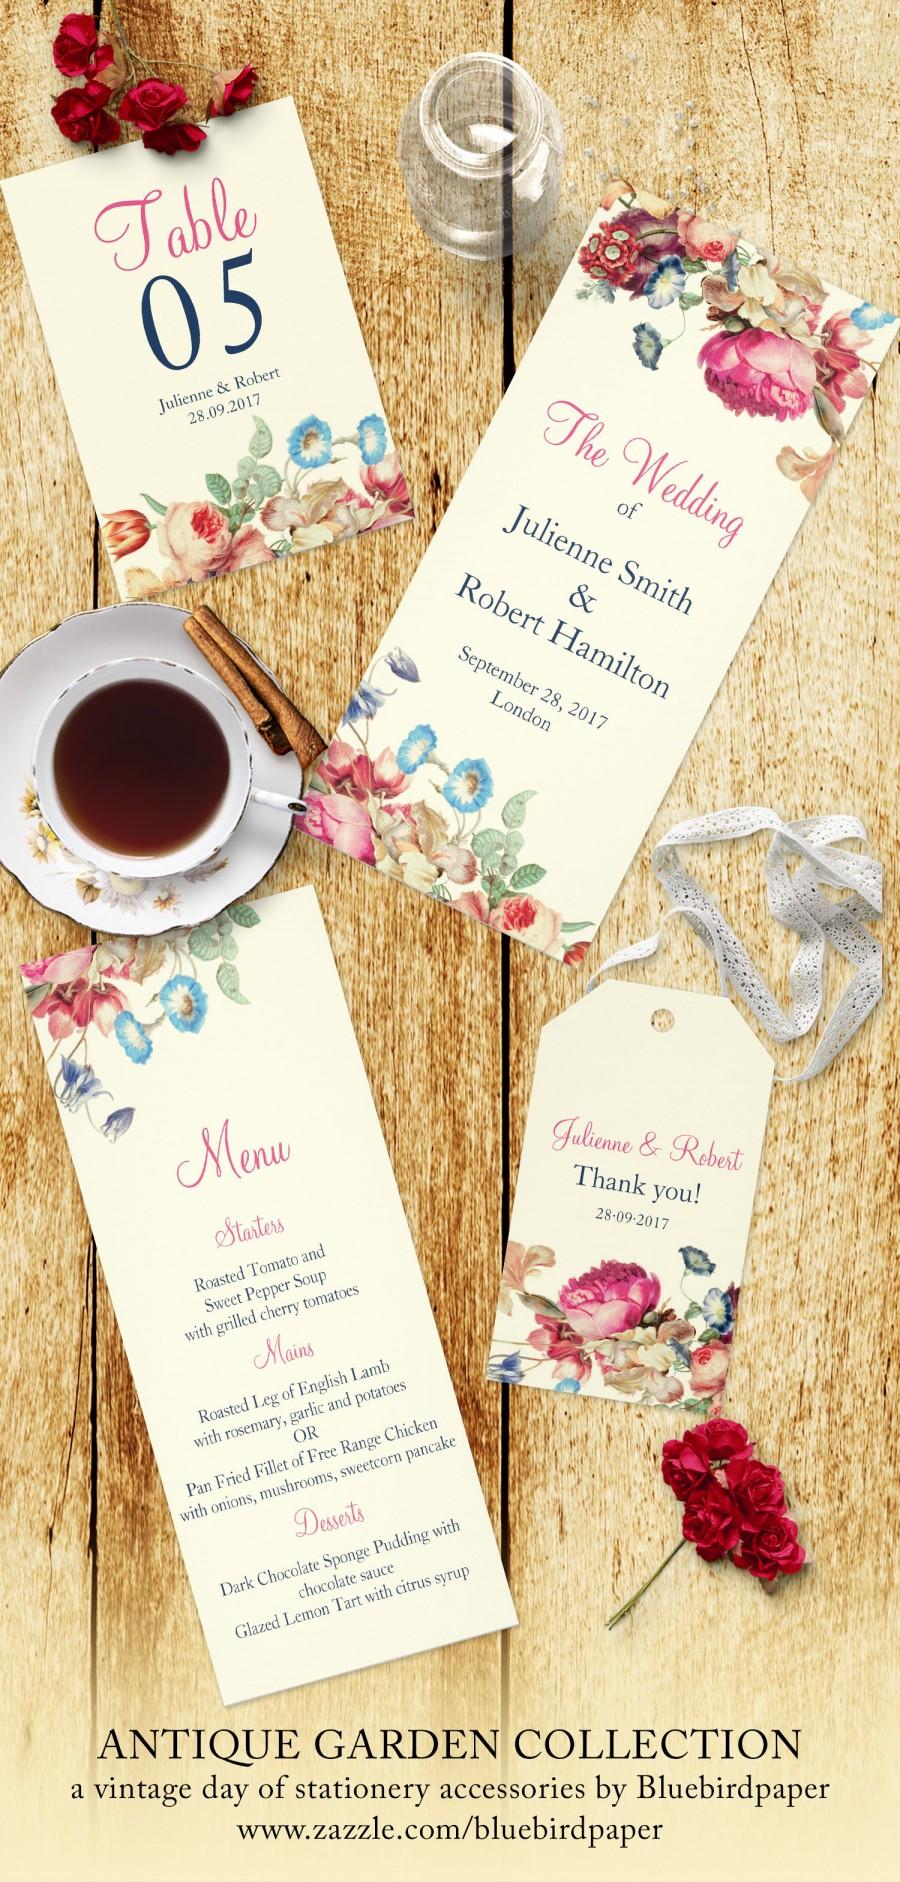 Wedding - Vintage day of stationery accessories